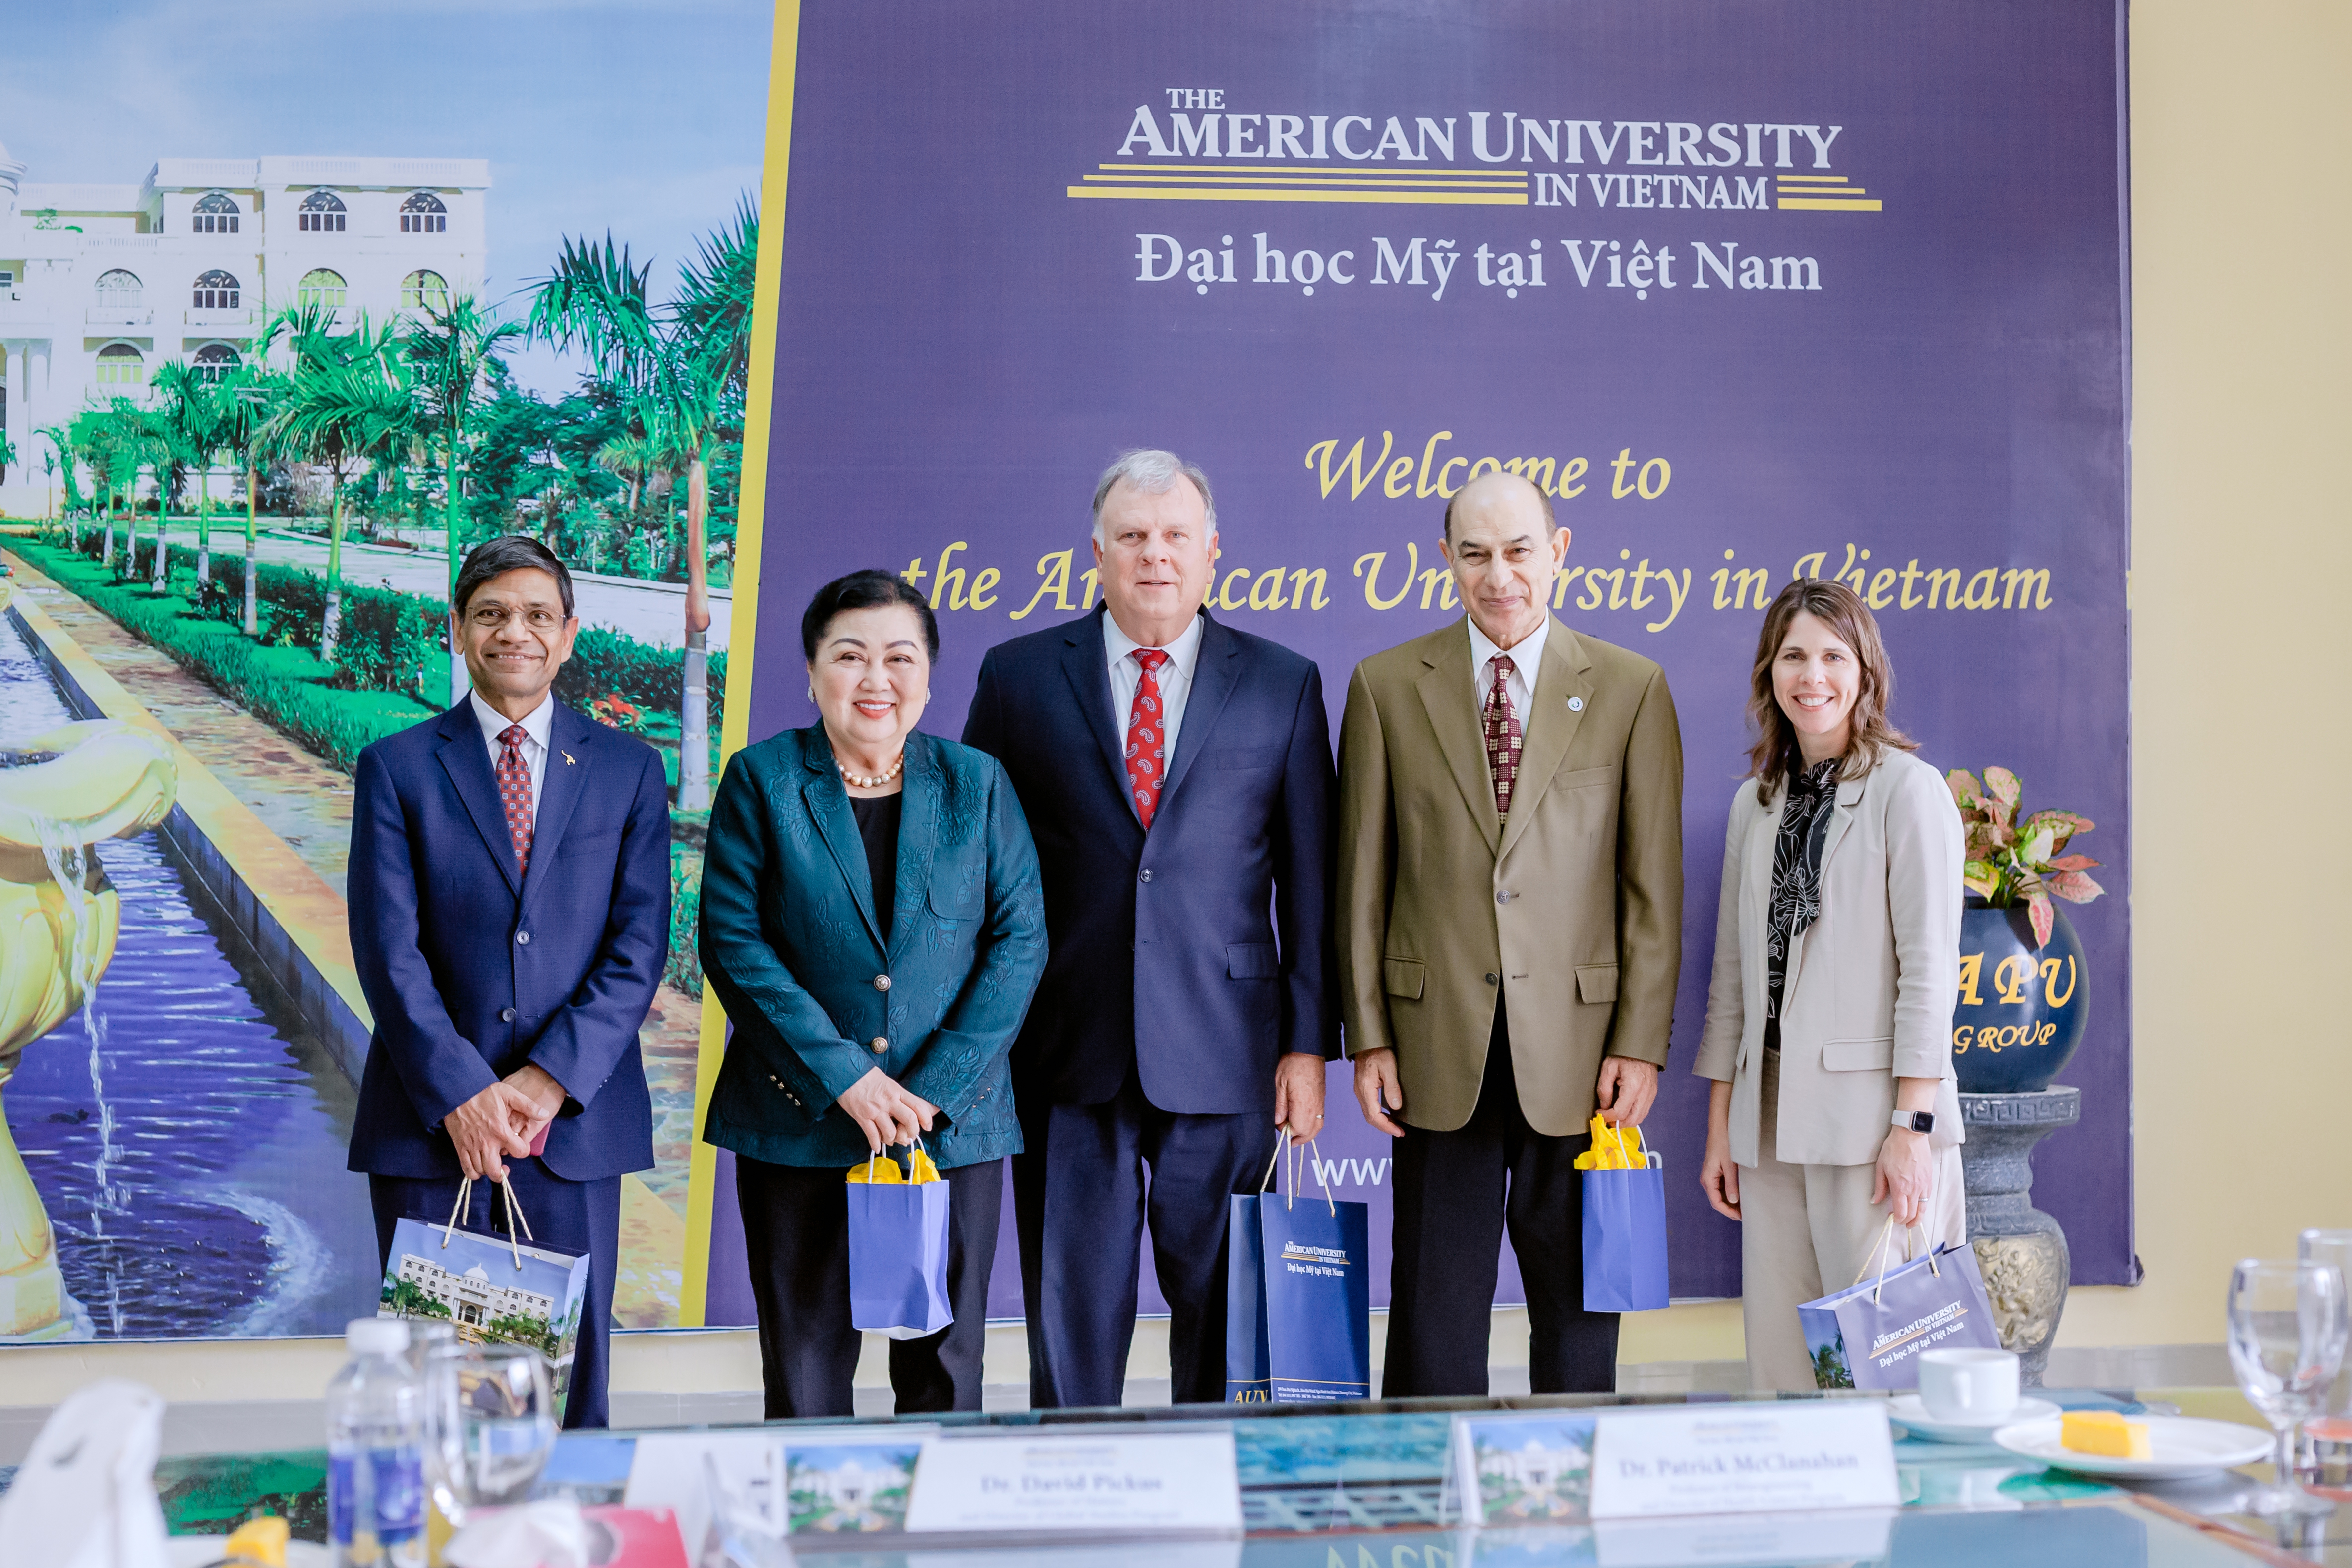 More Than 25 Years Of Burning Passion For Raising The Level Of Vietnamese Education